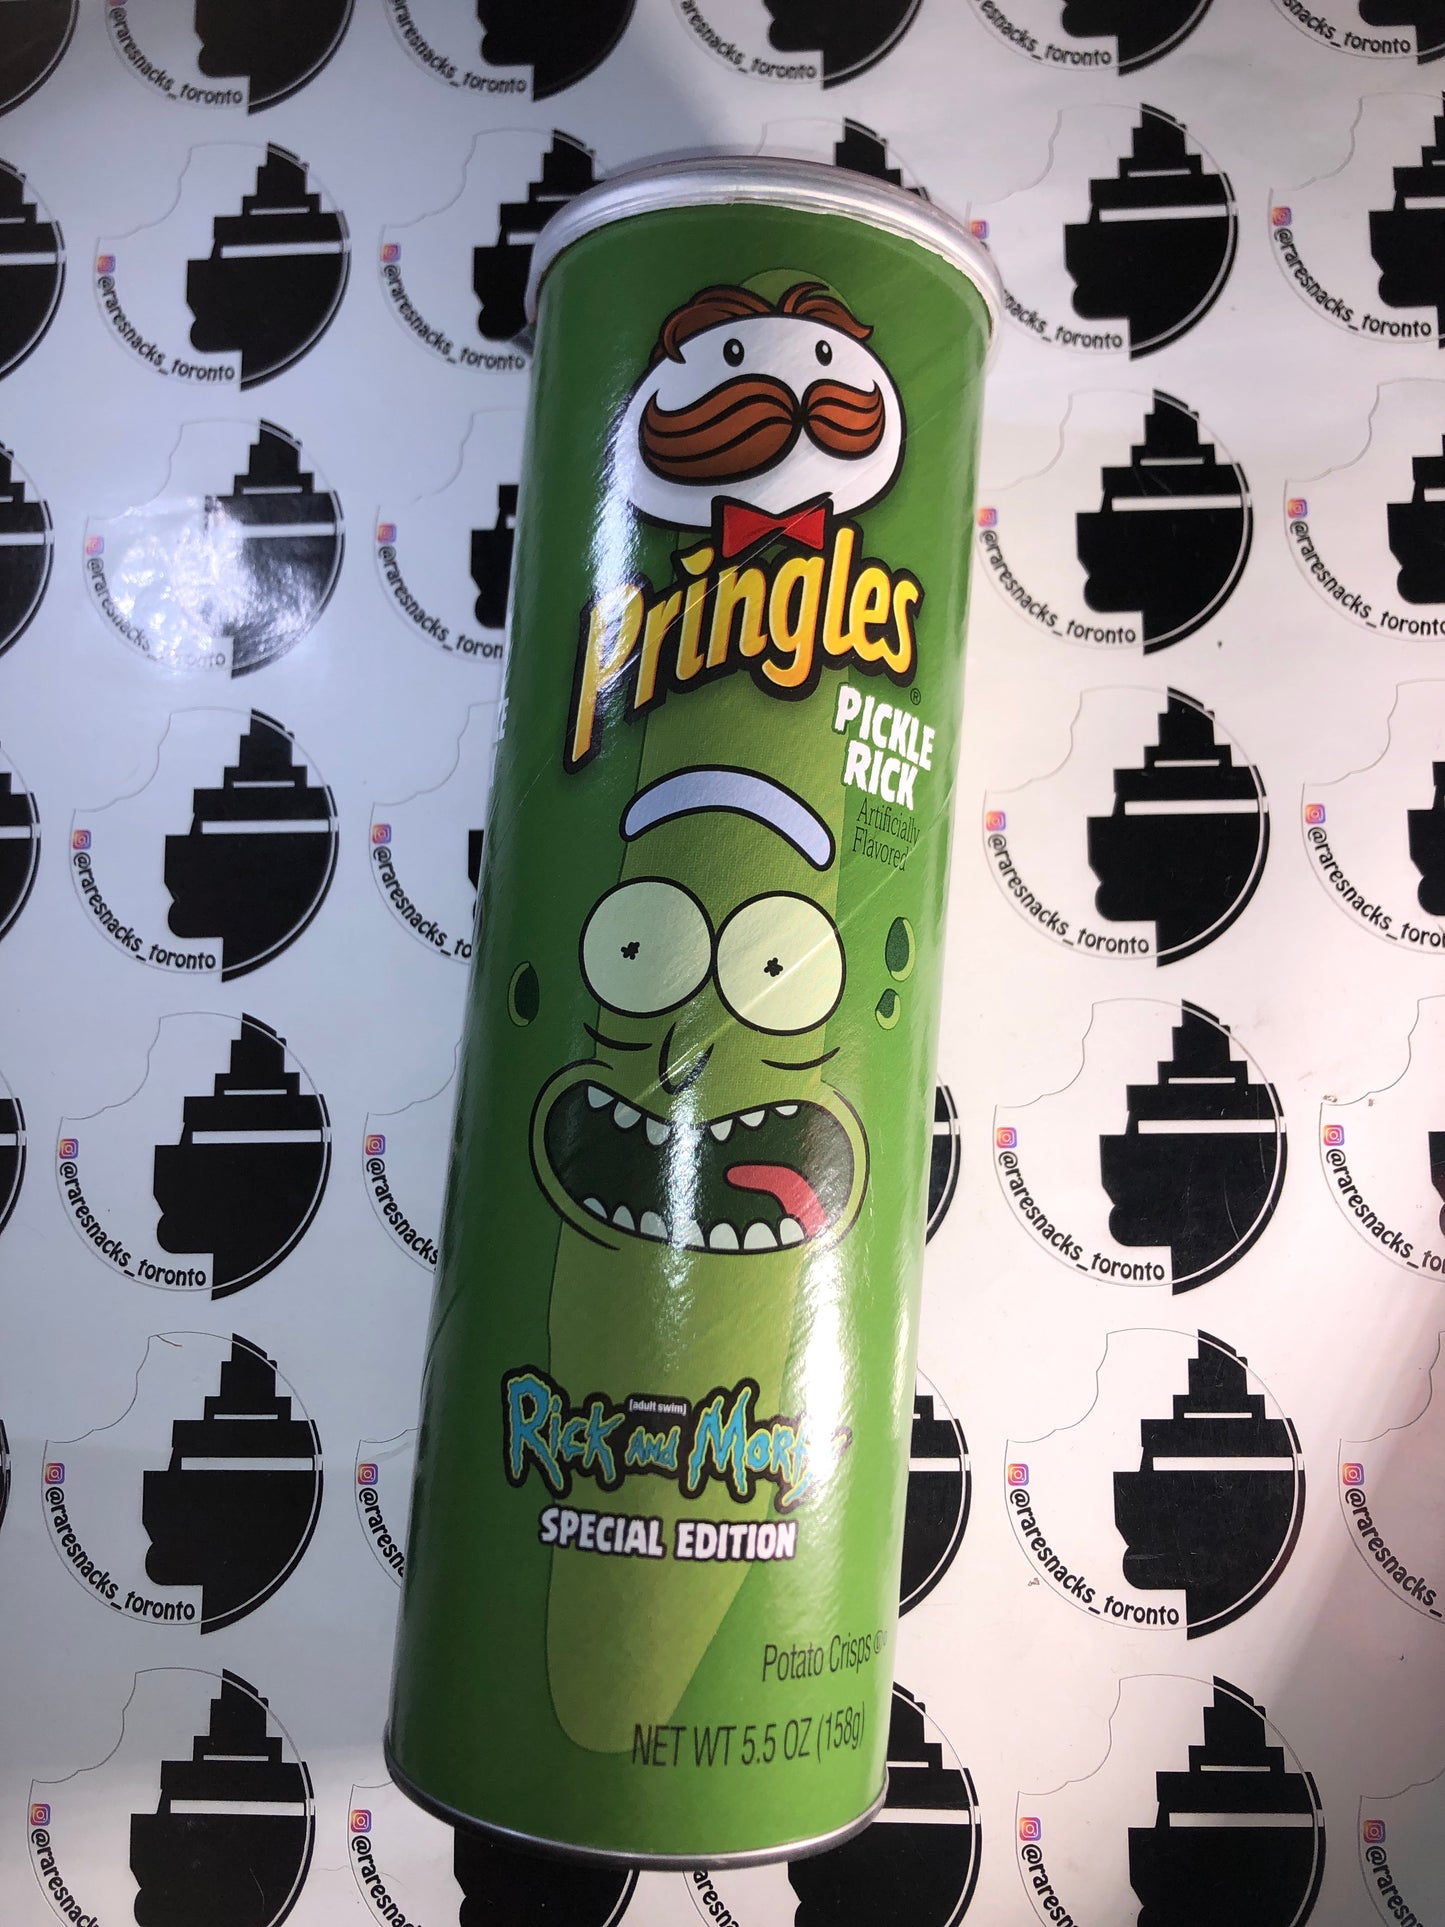 Pringle’s Pickle Rick Limited Edition